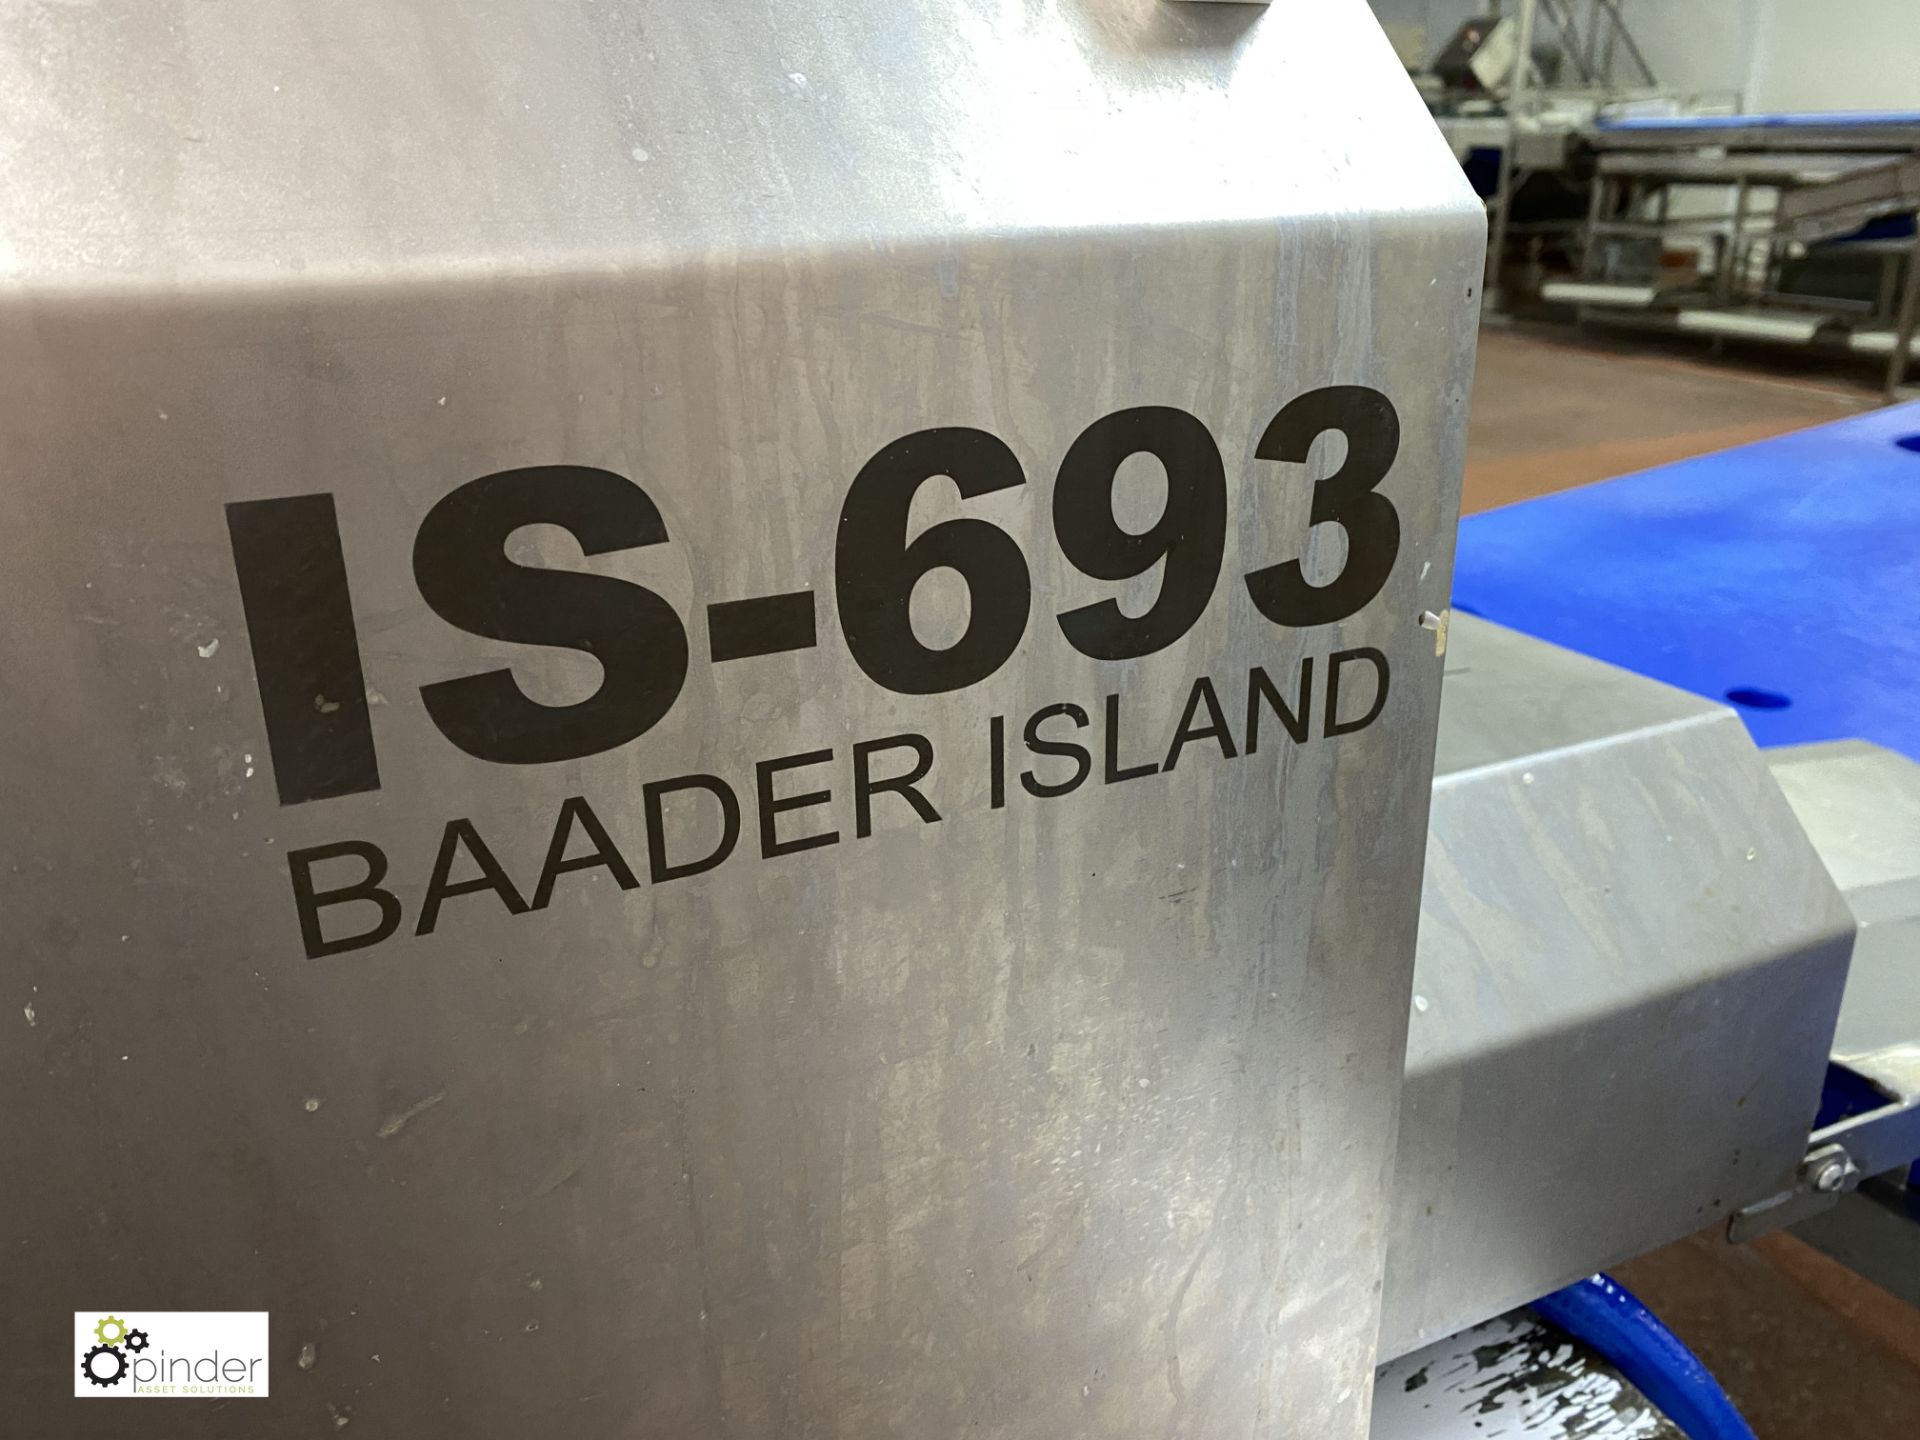 Baader Island IS-693 high speed Fish Descaler used for salmon, year 2019, serial number 49-693-01 ( - Image 6 of 19